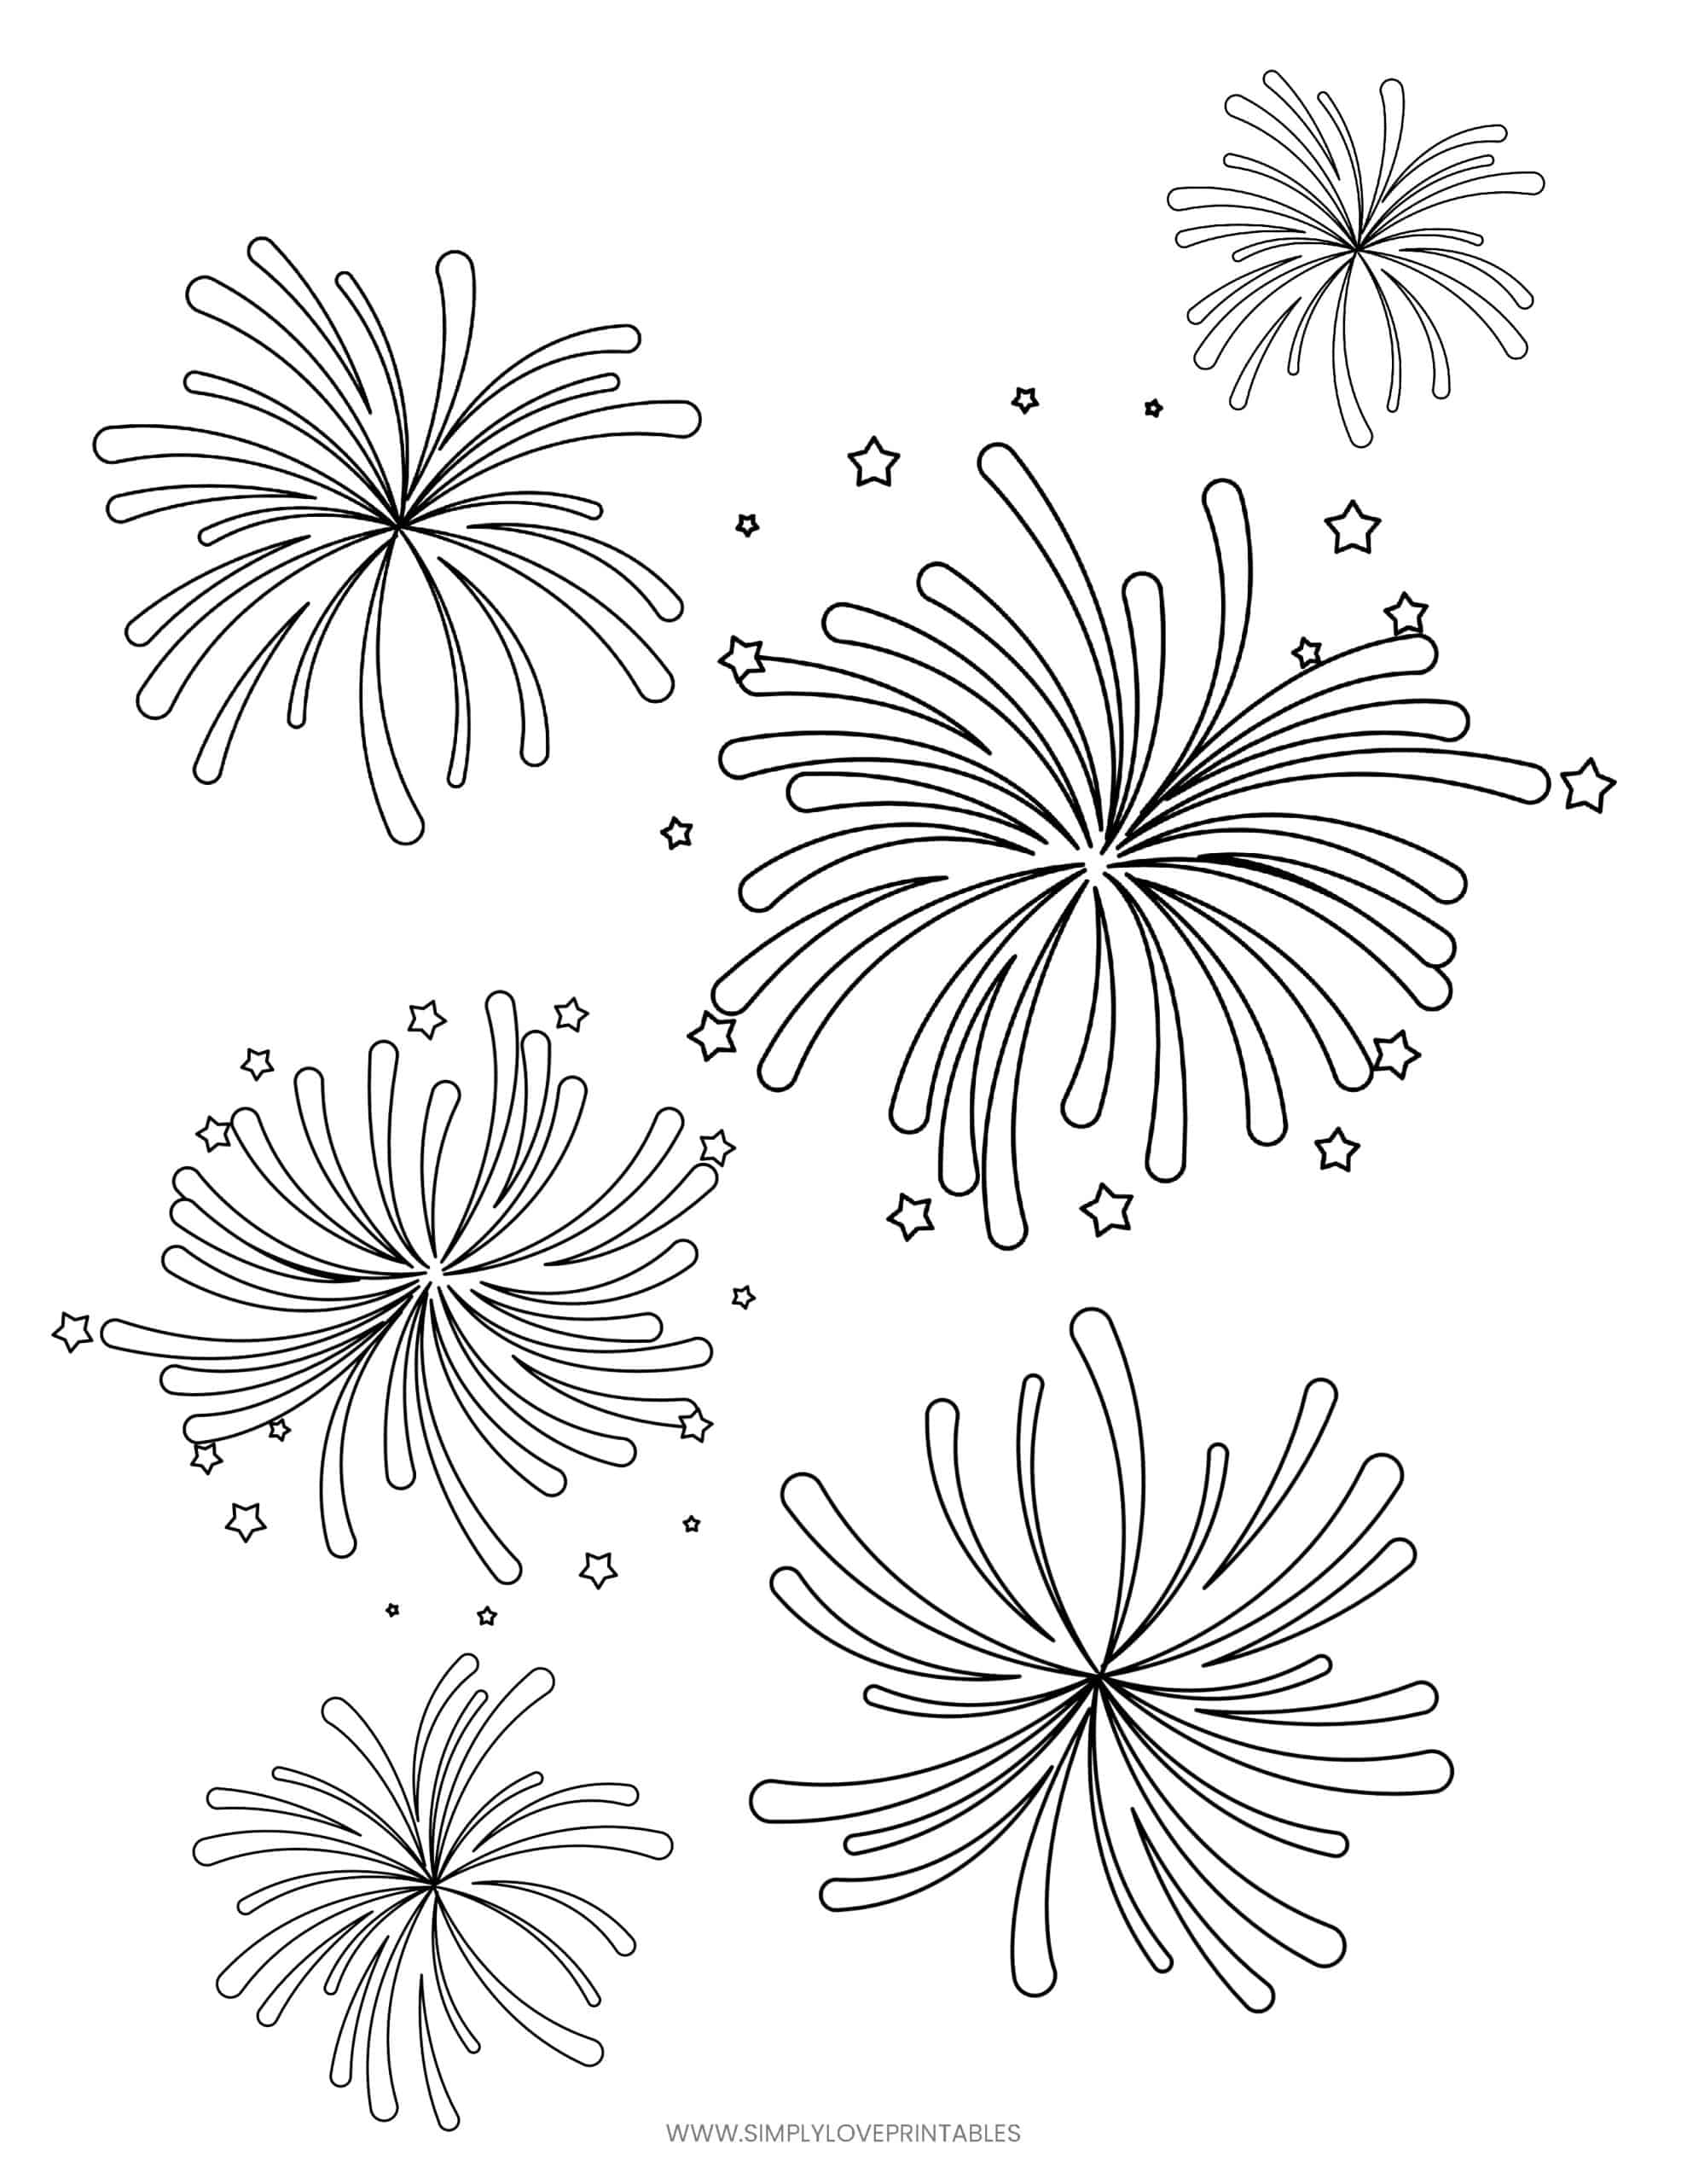 Celebrate Freedom with 4th of July: 180+ Free Coloring Pages 108